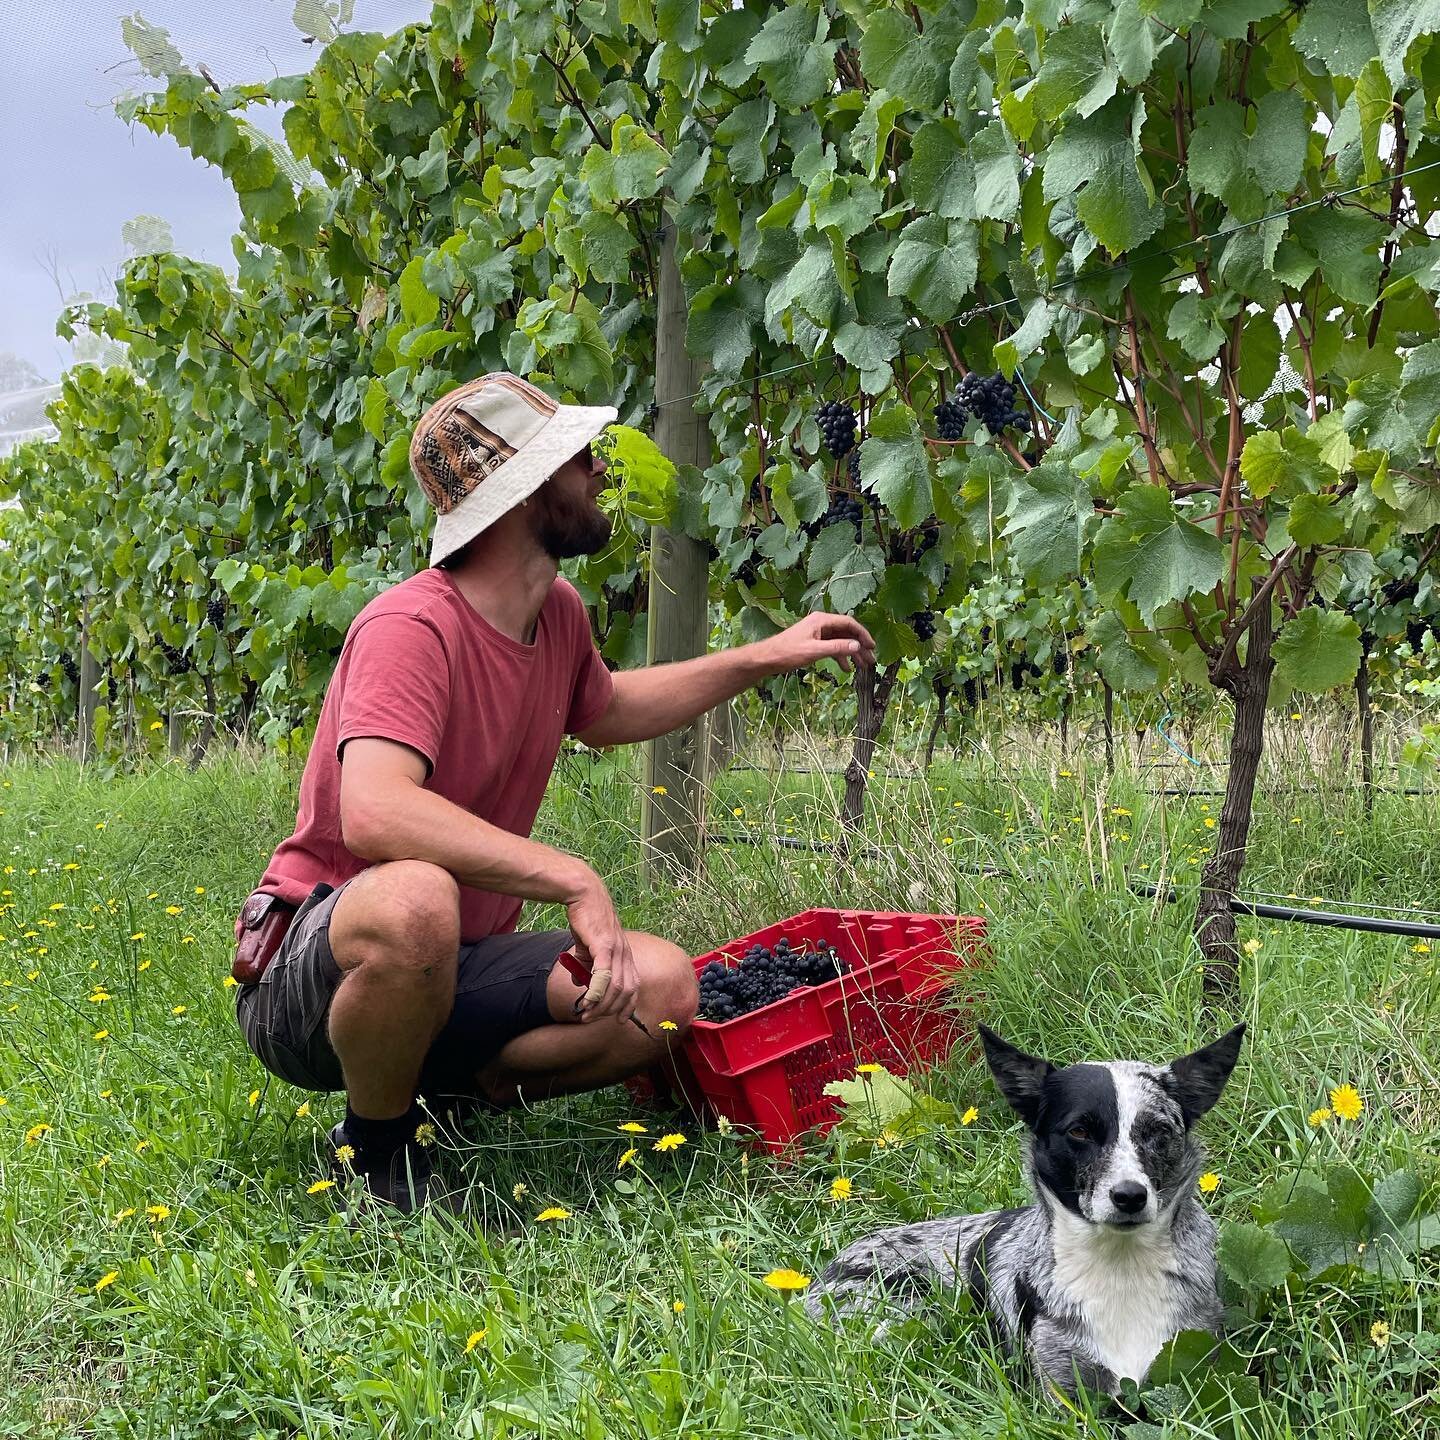 Harvest days, the best kind. It was a smooth start that escalated quite quickly. Thank you to those who have helped pick our grapes so far, we&rsquo;re half way through and couldn&rsquo;t have done it without the extra hands!

Big love @joannah_d, @m